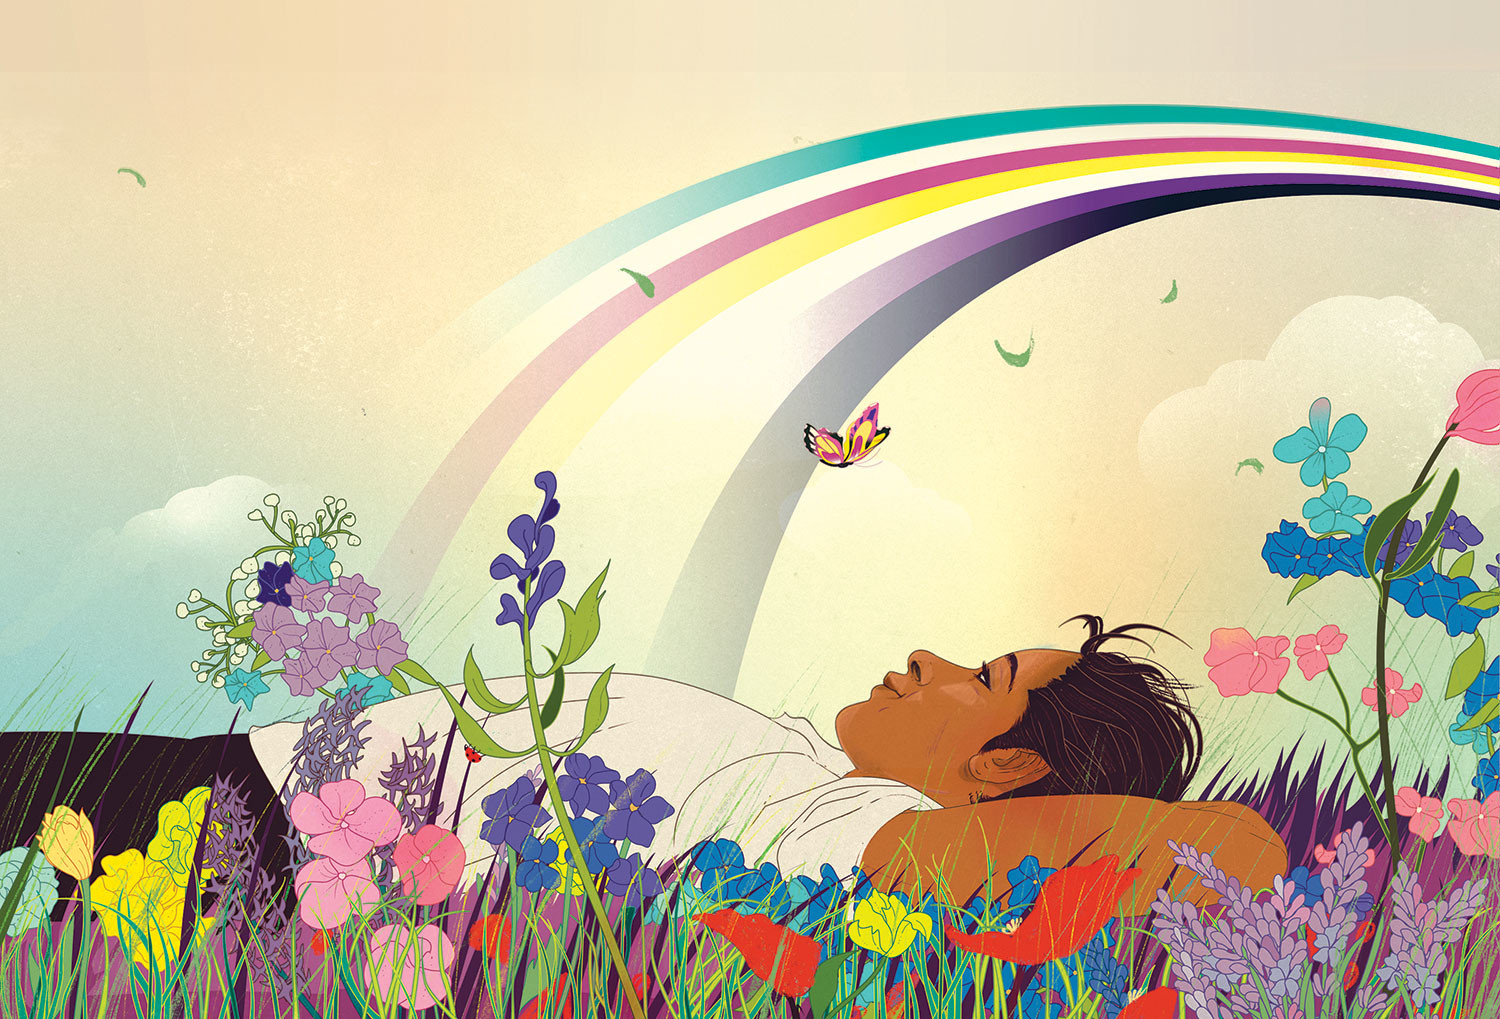 Illustration by Marcos Chin of a young person laying in a field of flowers under a rainbow